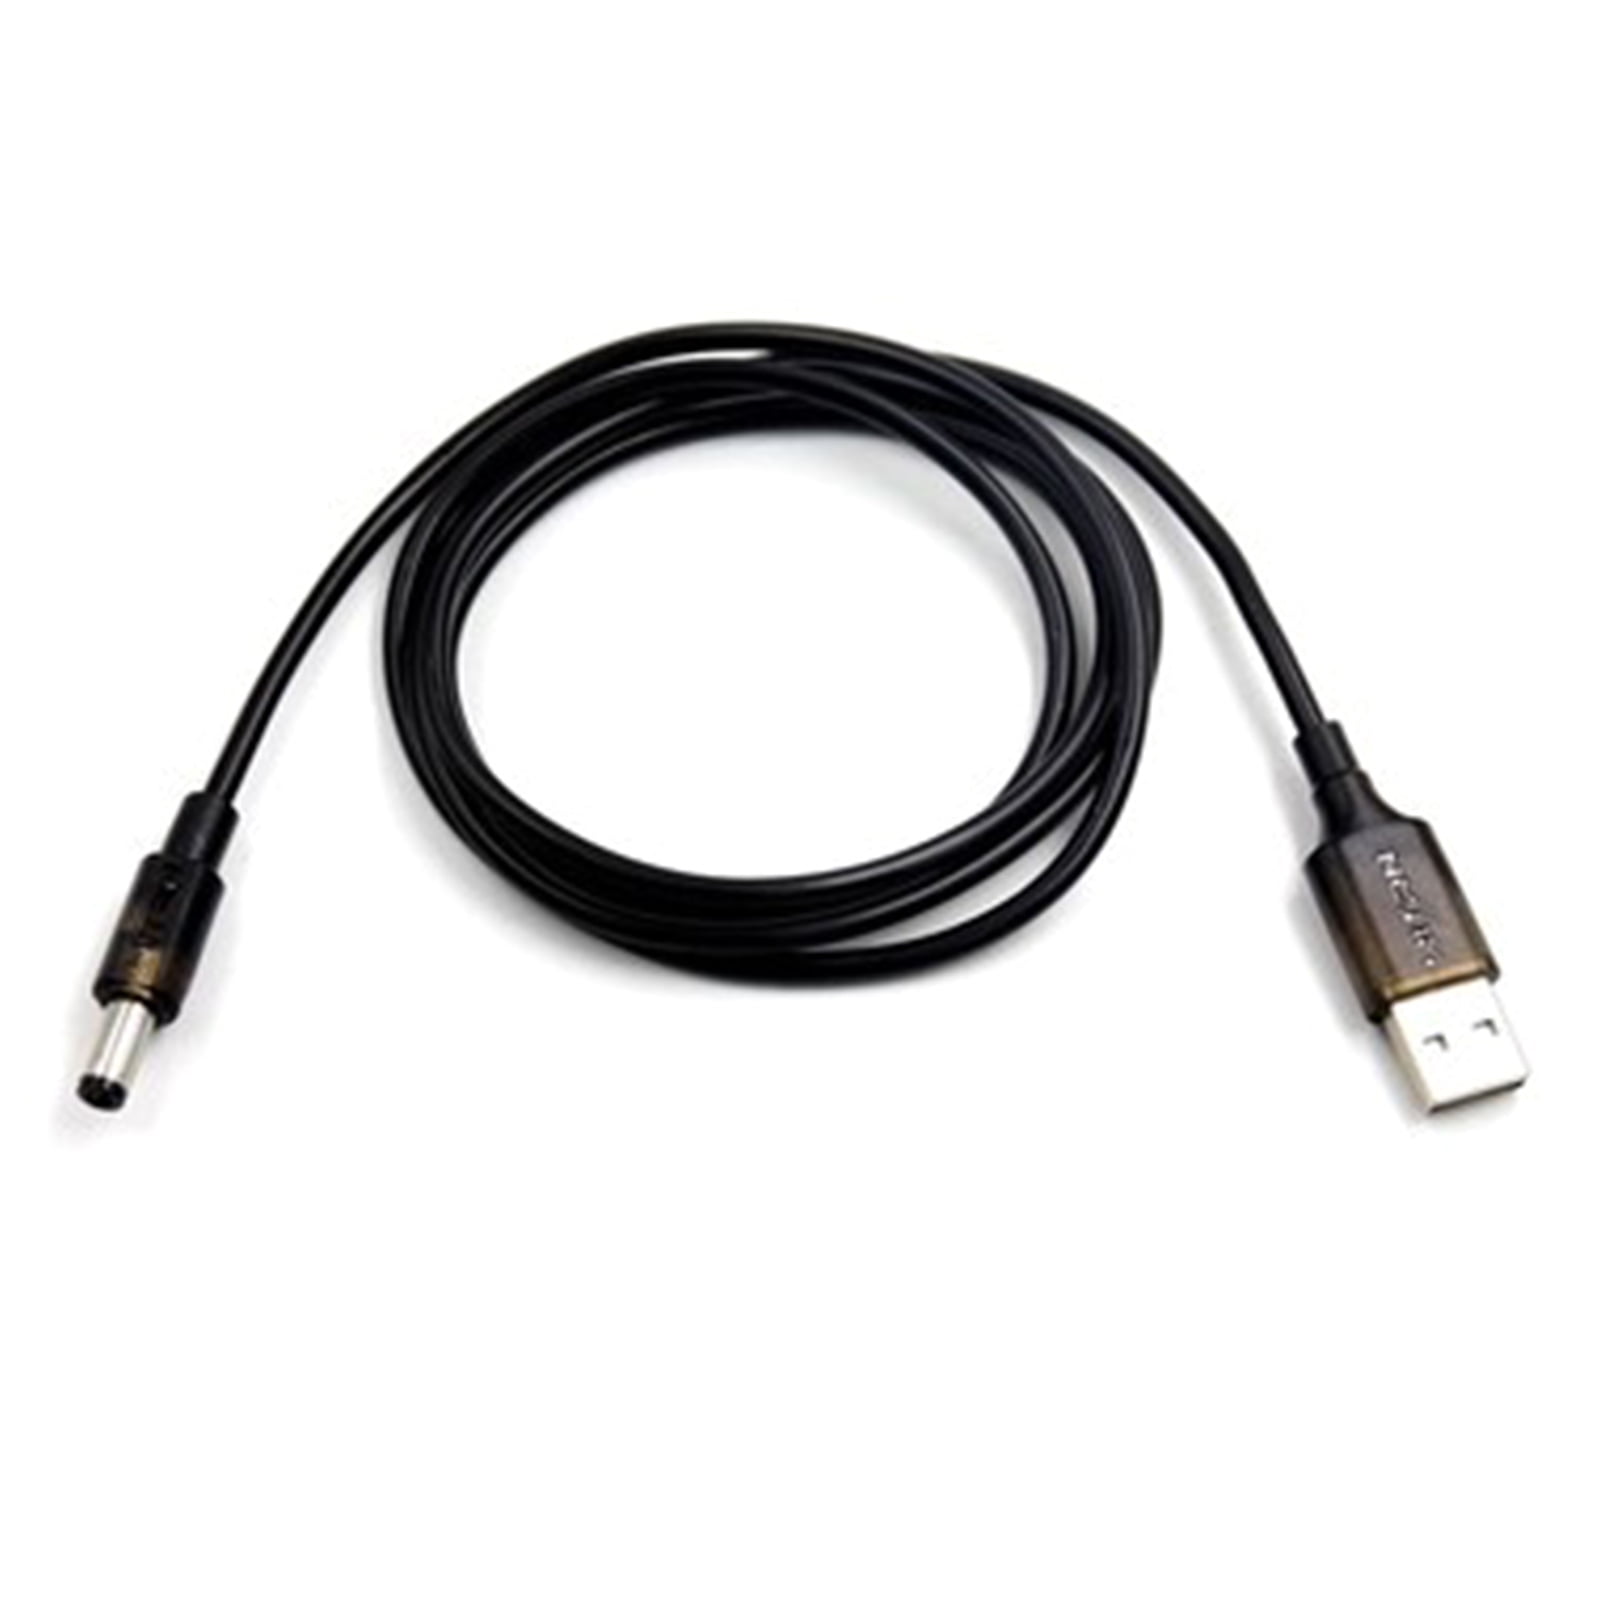 Optec USB TO 12V DC Power Converter Cable